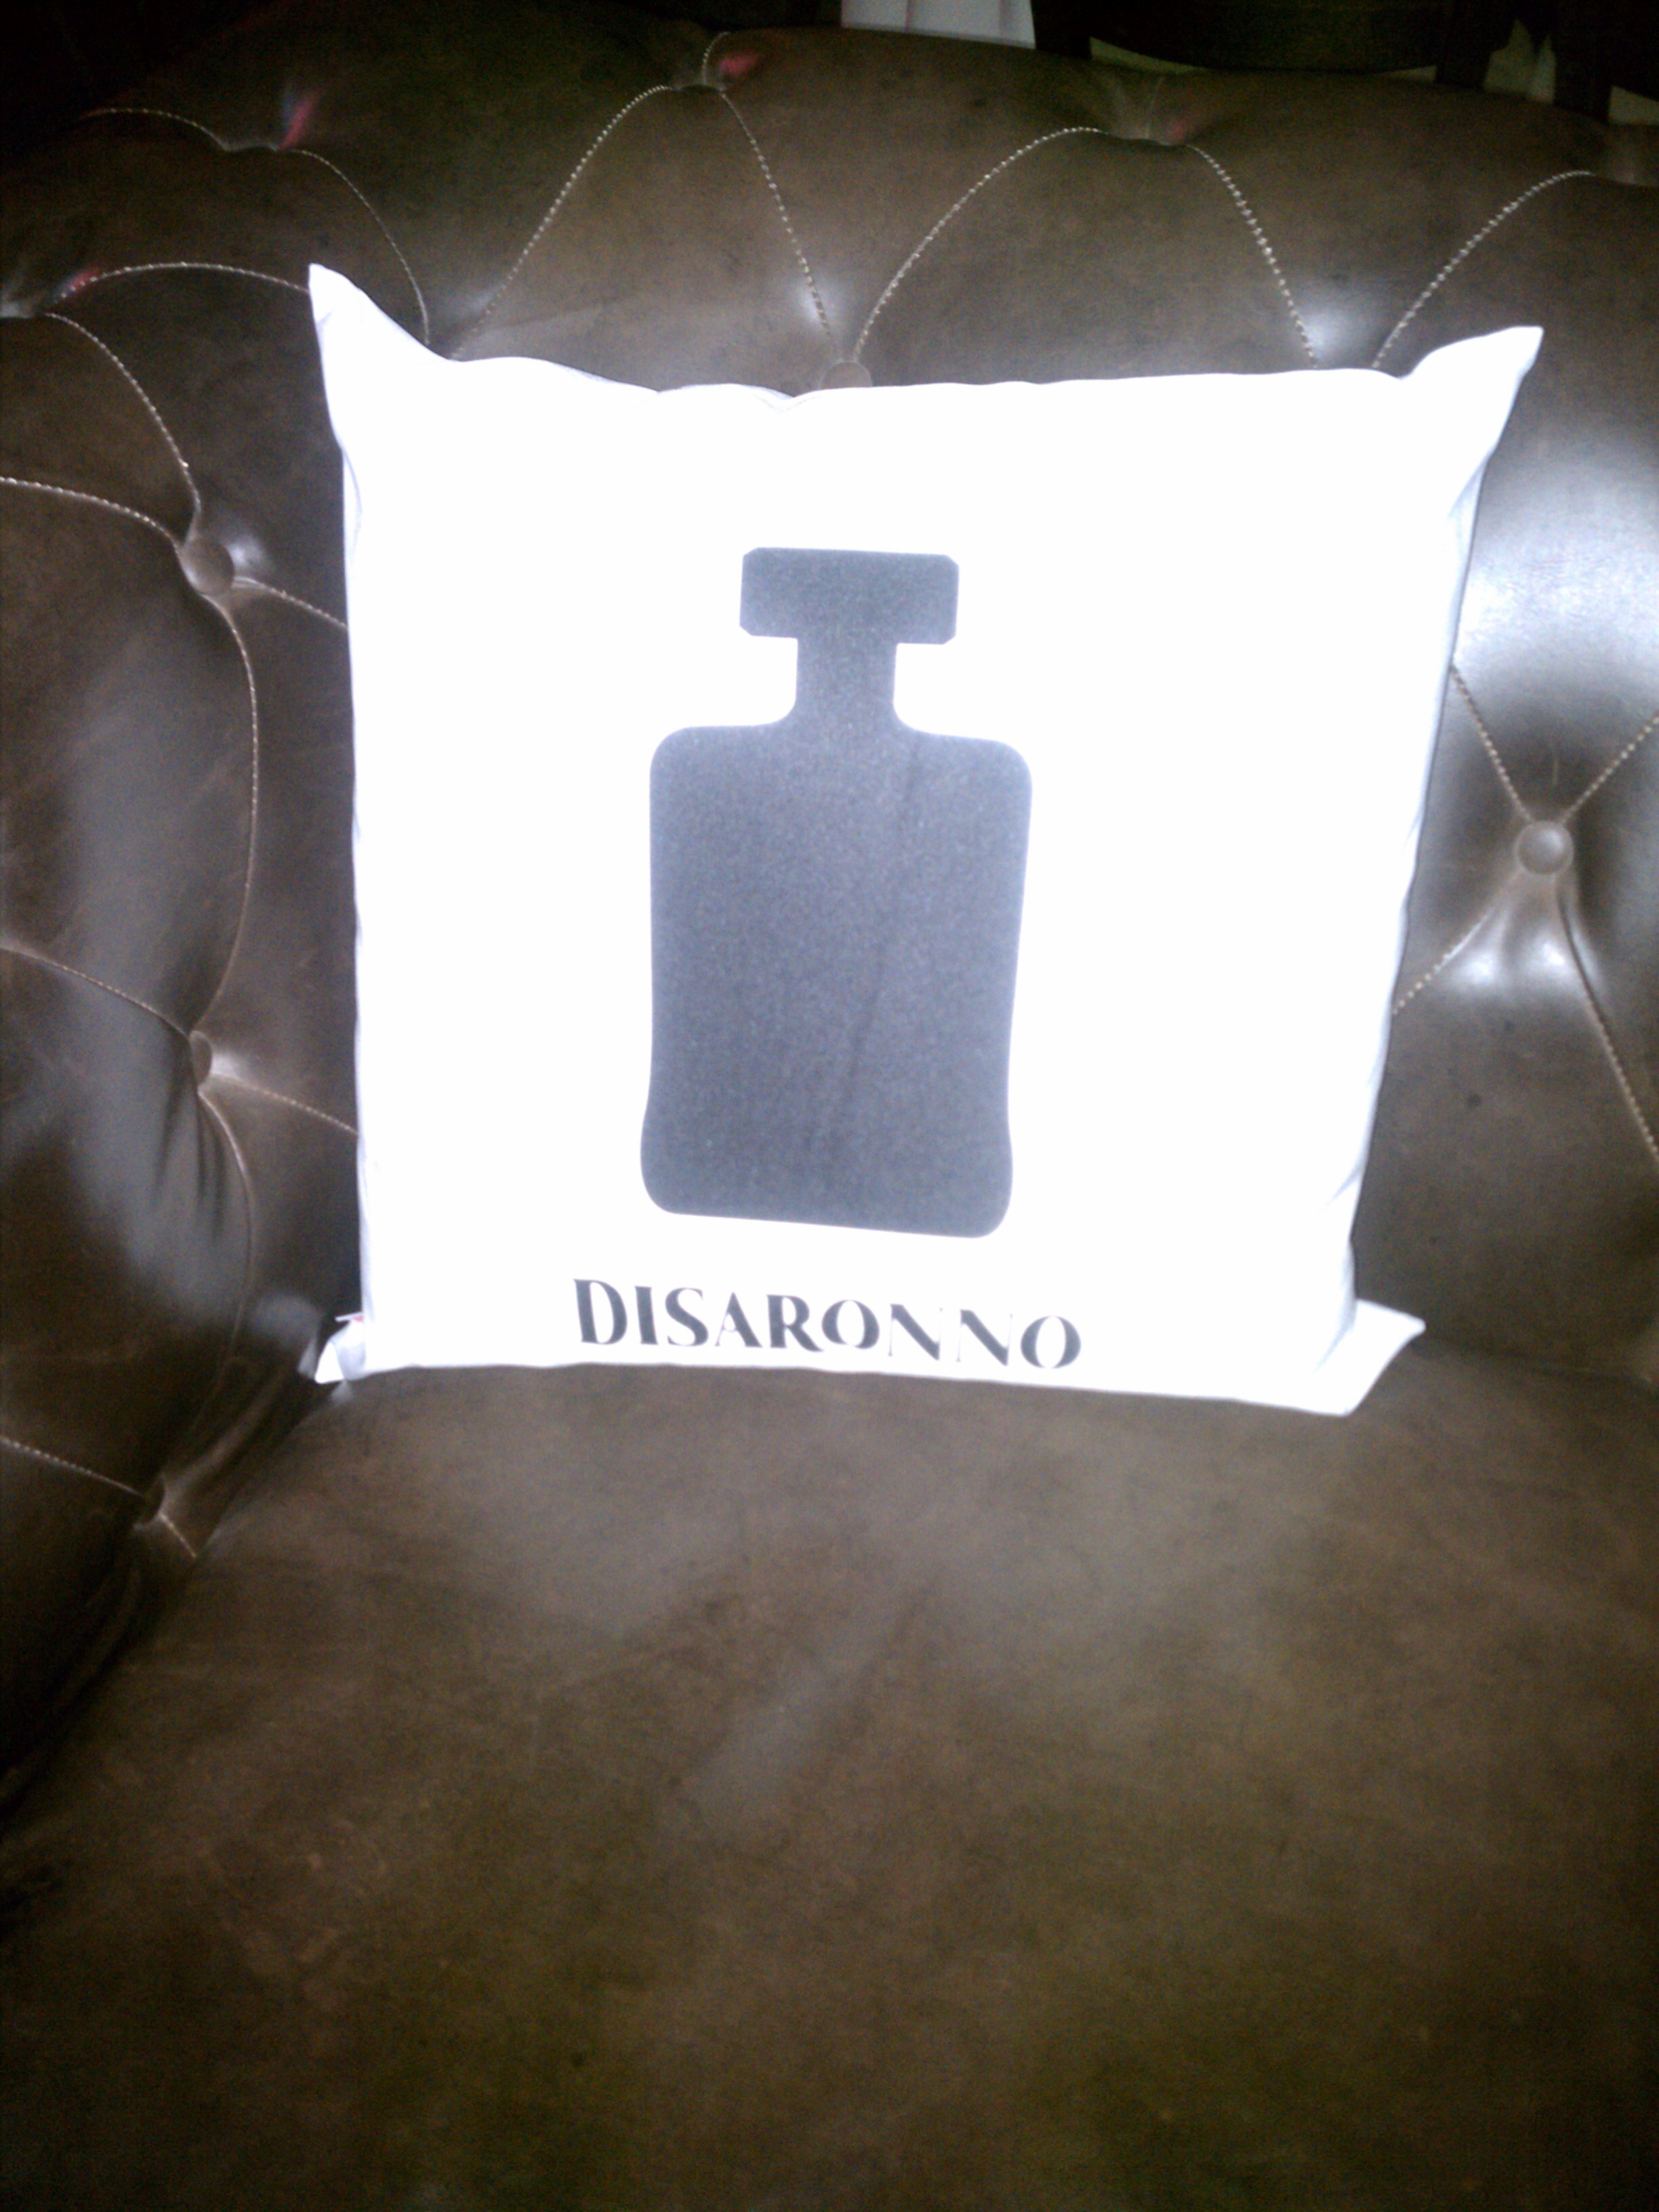 Pillow talk...this Disaronno pillow helped guests get their drink on. Photo by Vida Ghaffari